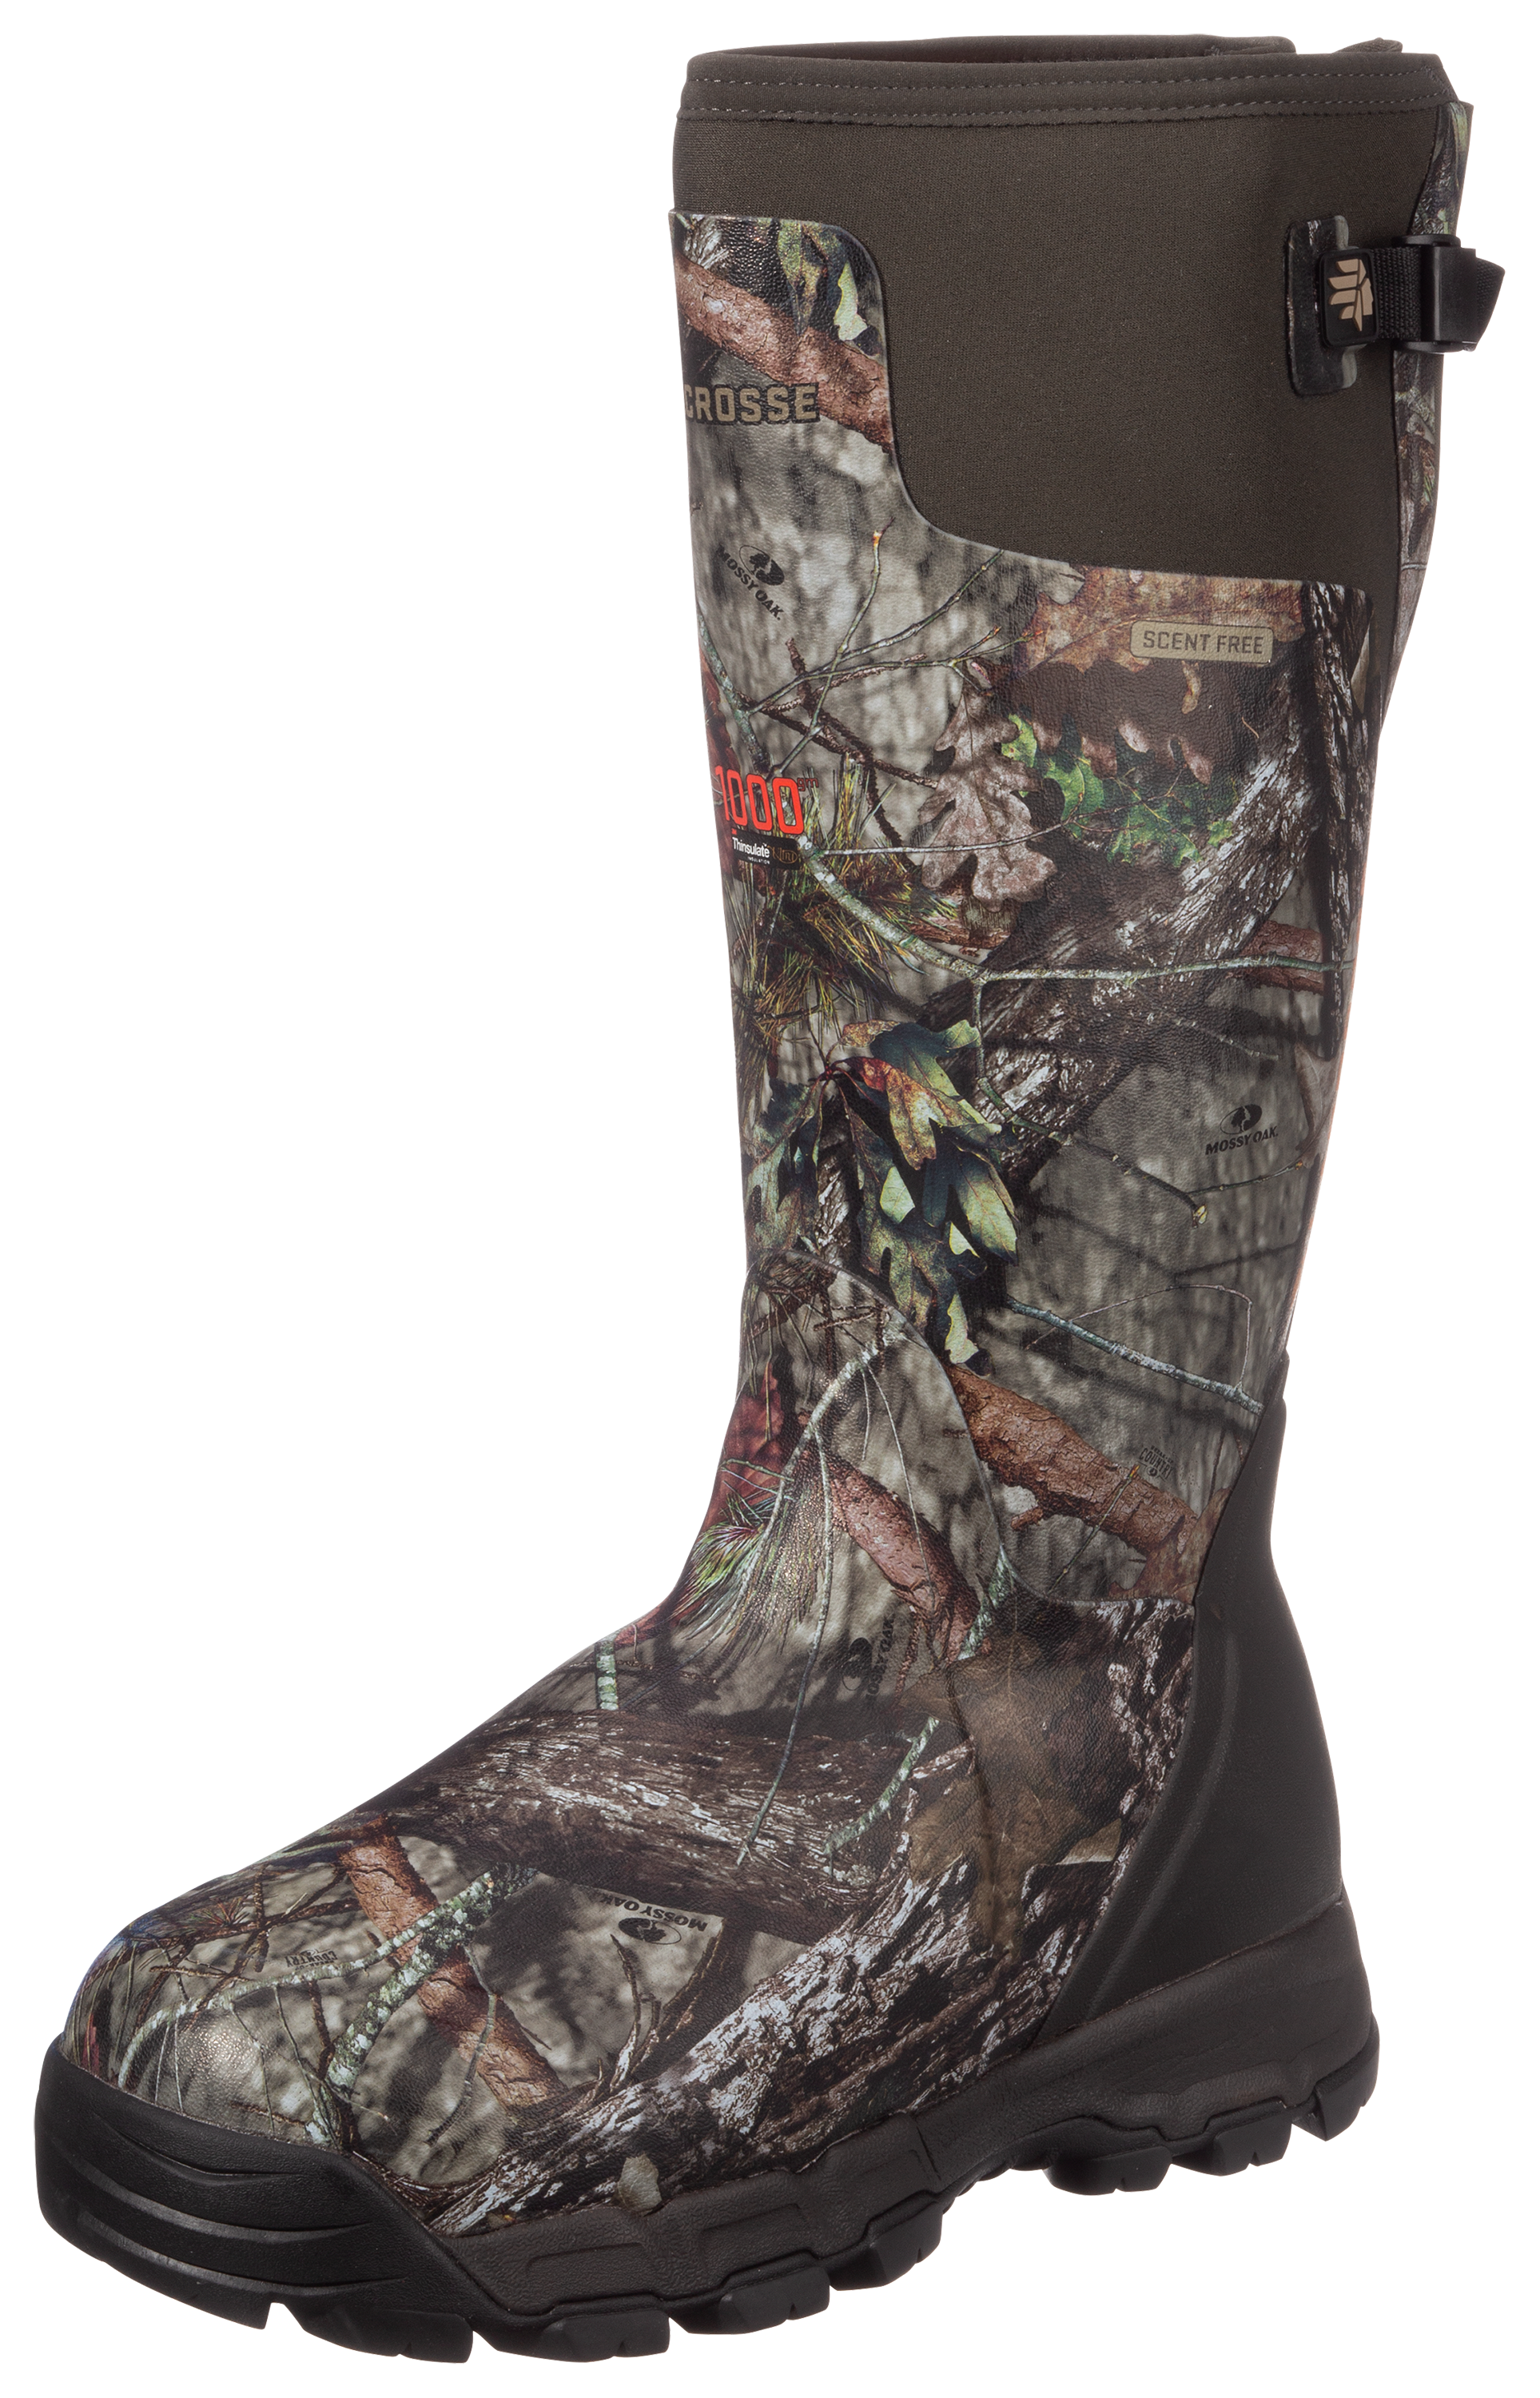 LaCrosse AlphaBurly Pro 1,000 Insulated Hunting Boots for Men